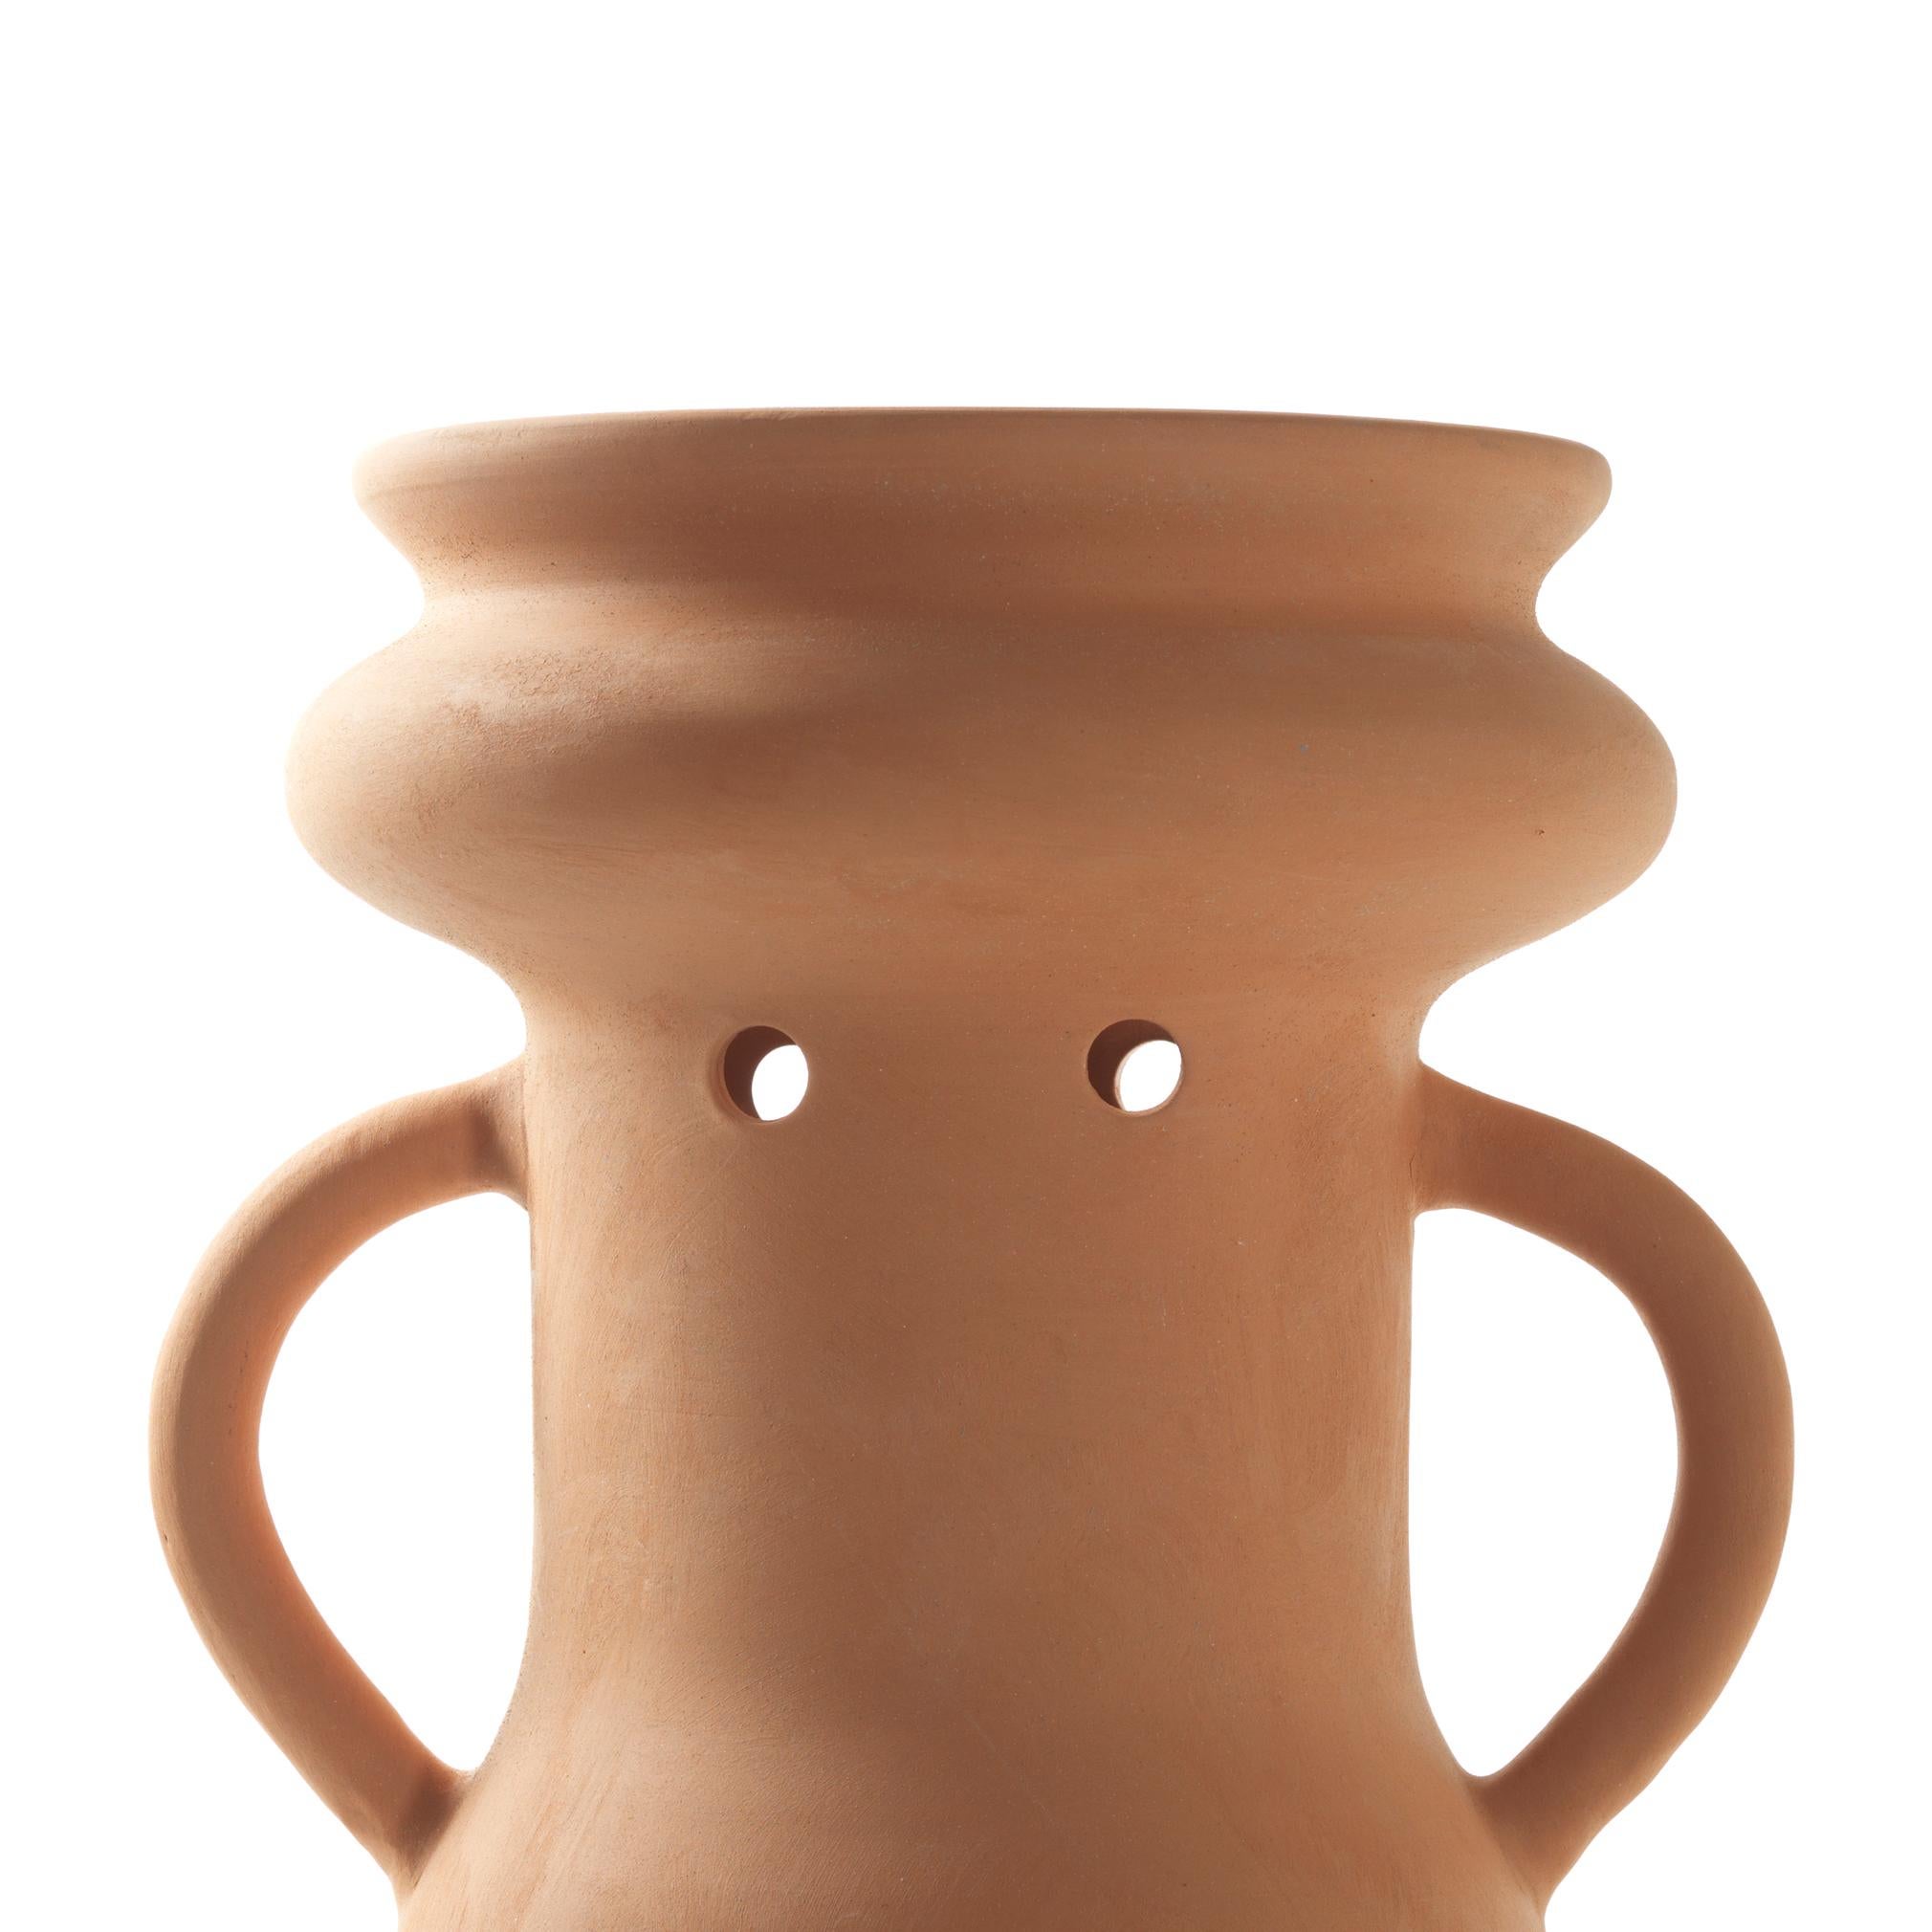 Gardenias vase nº 4 by Jaime Hayon

Hand-turned Terracota withan impermeable treatment.